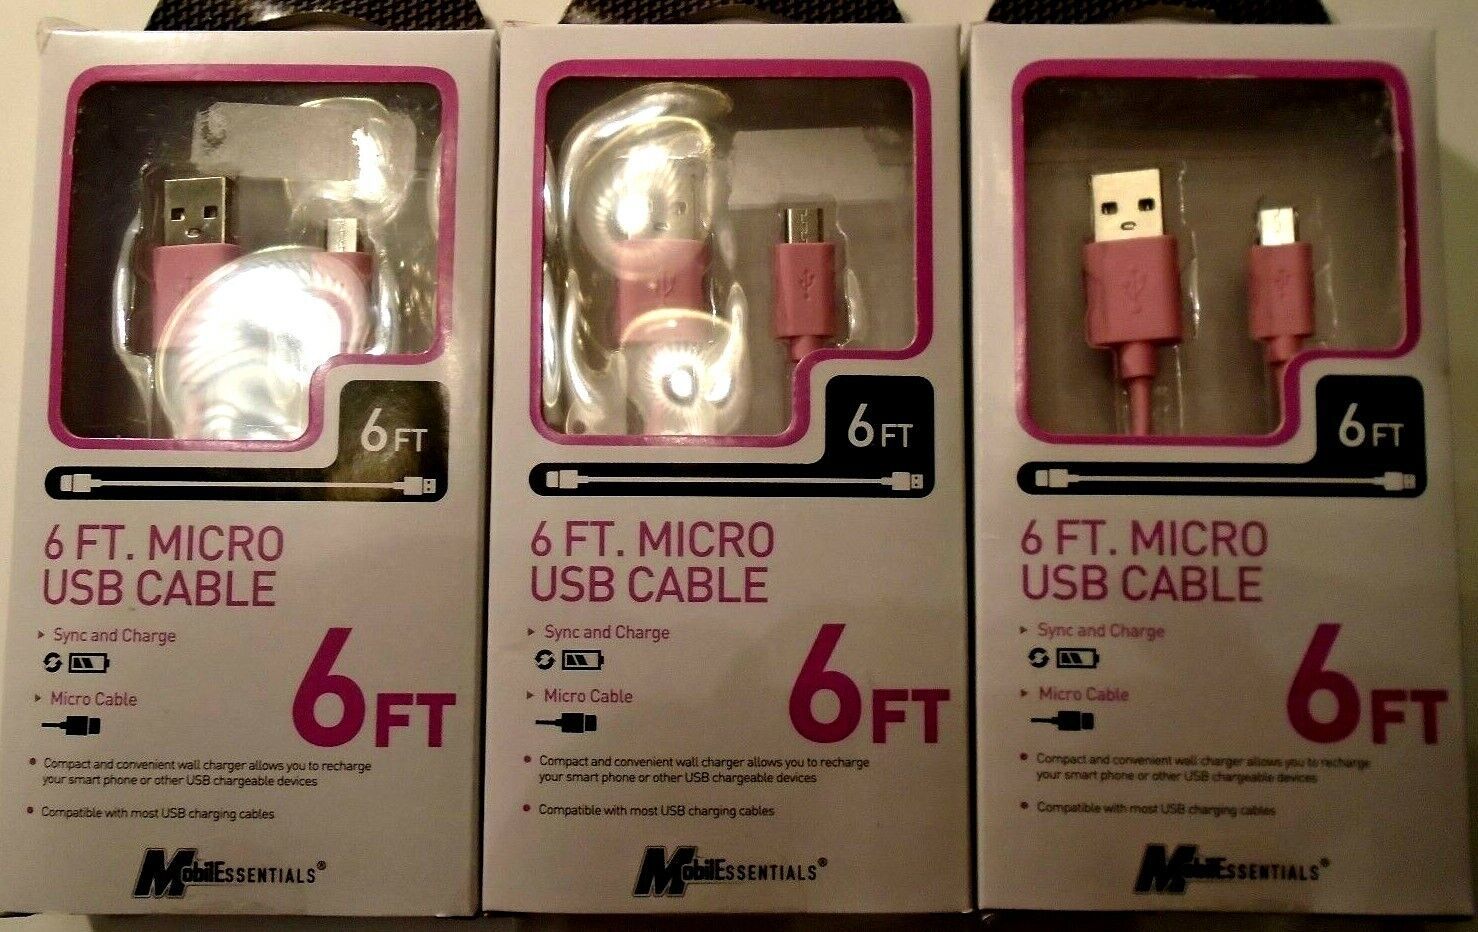 Lot of 25, 6Ft. Micro USB Cable, sync and charge, Micro Cable, New - $29.69